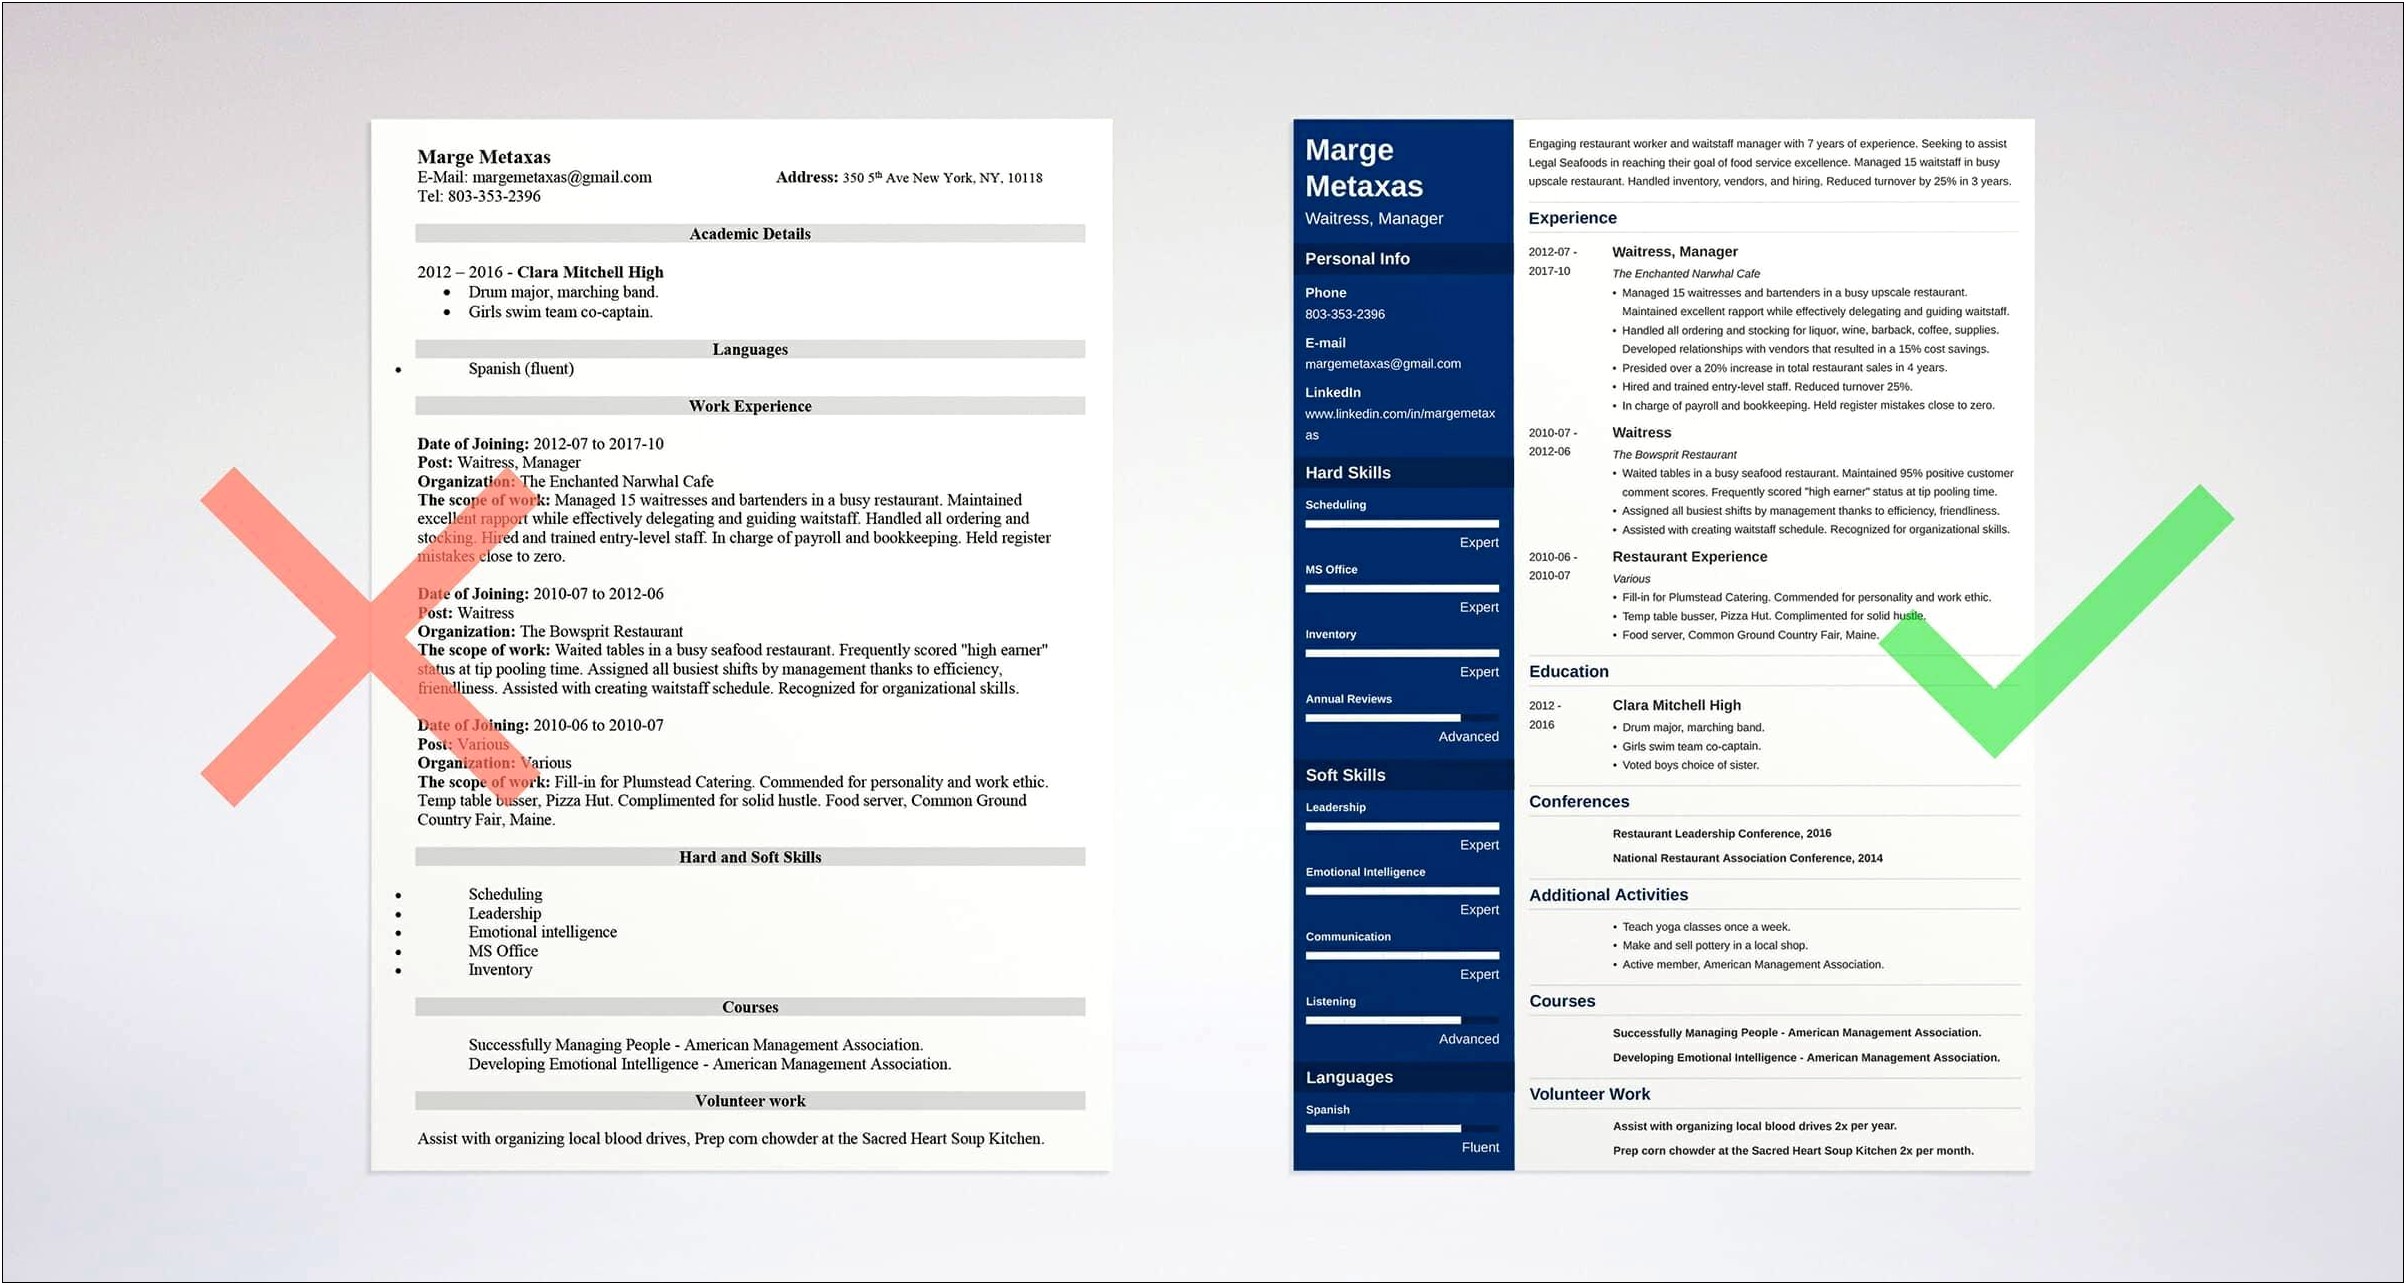 Example Of A Good Restaurant Resume